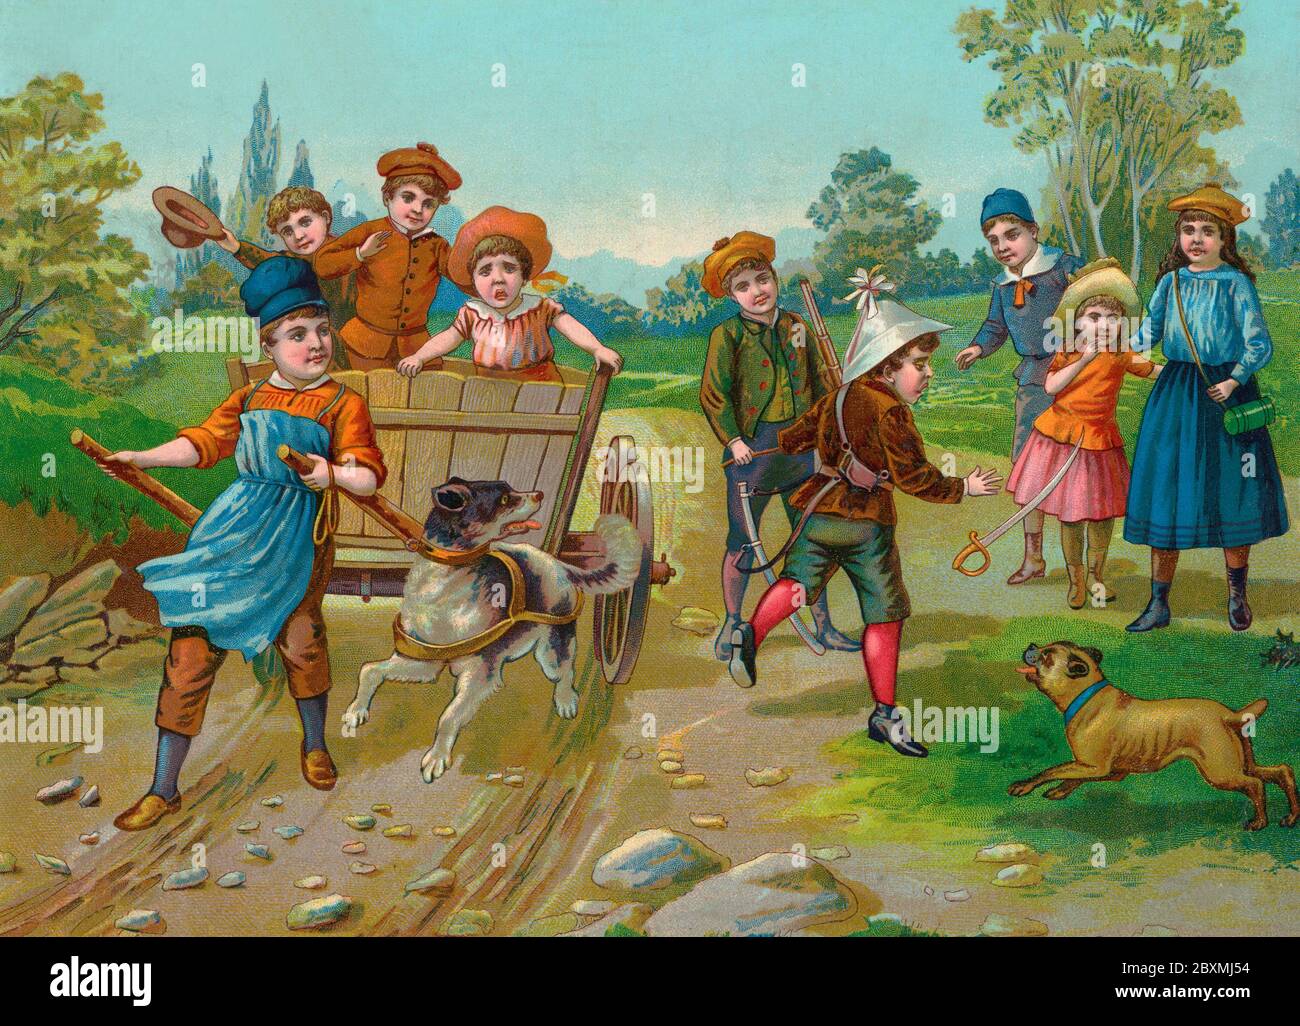 Old illustration. On this British 19th century illustration children are playing outdoors. A happy summer scene. Stock Photo